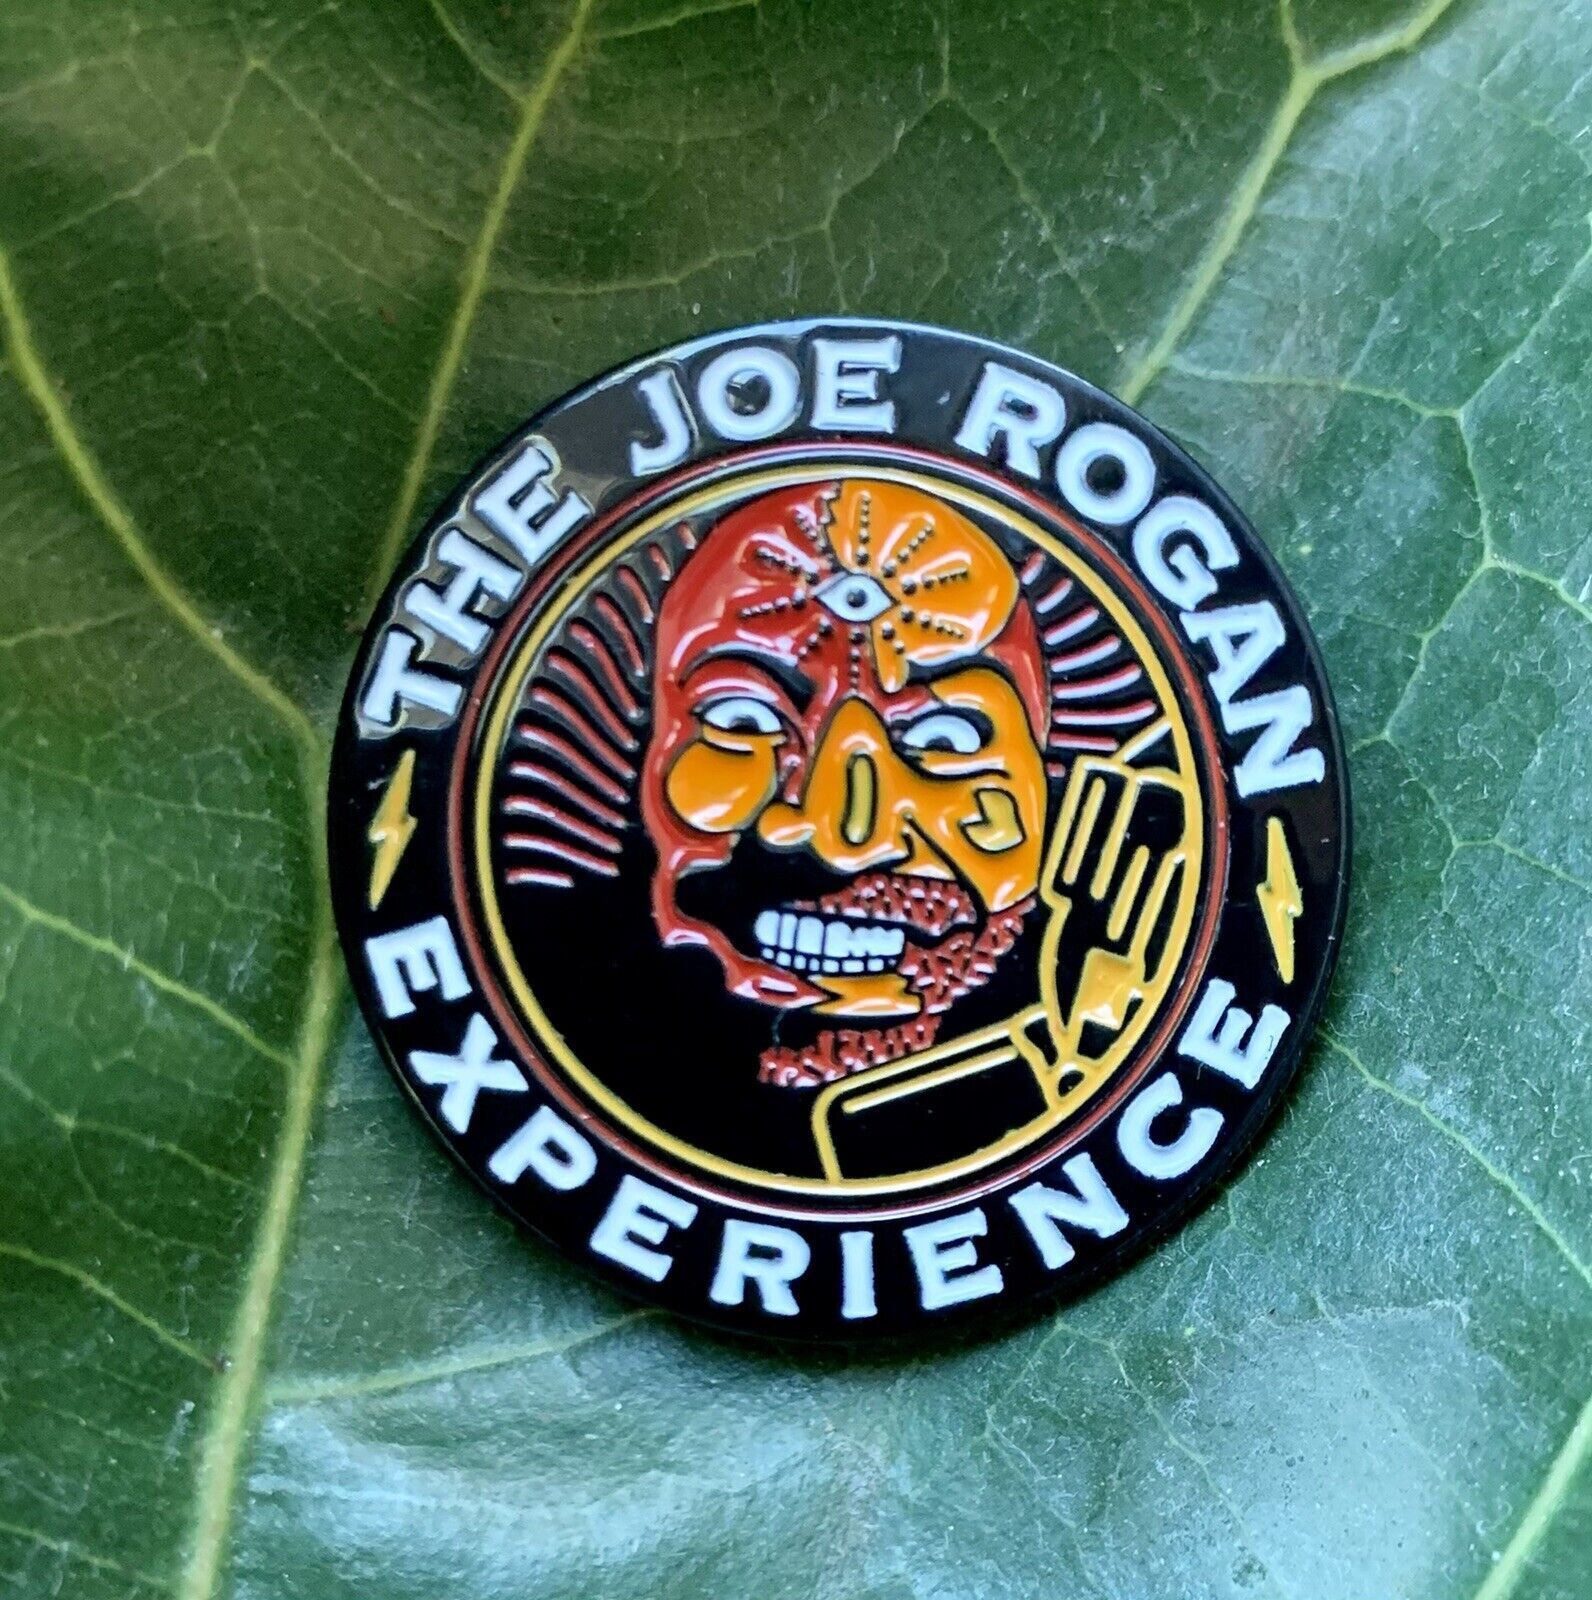 The Joe Rogan Experience Podcast Collectible Pin 1.5”